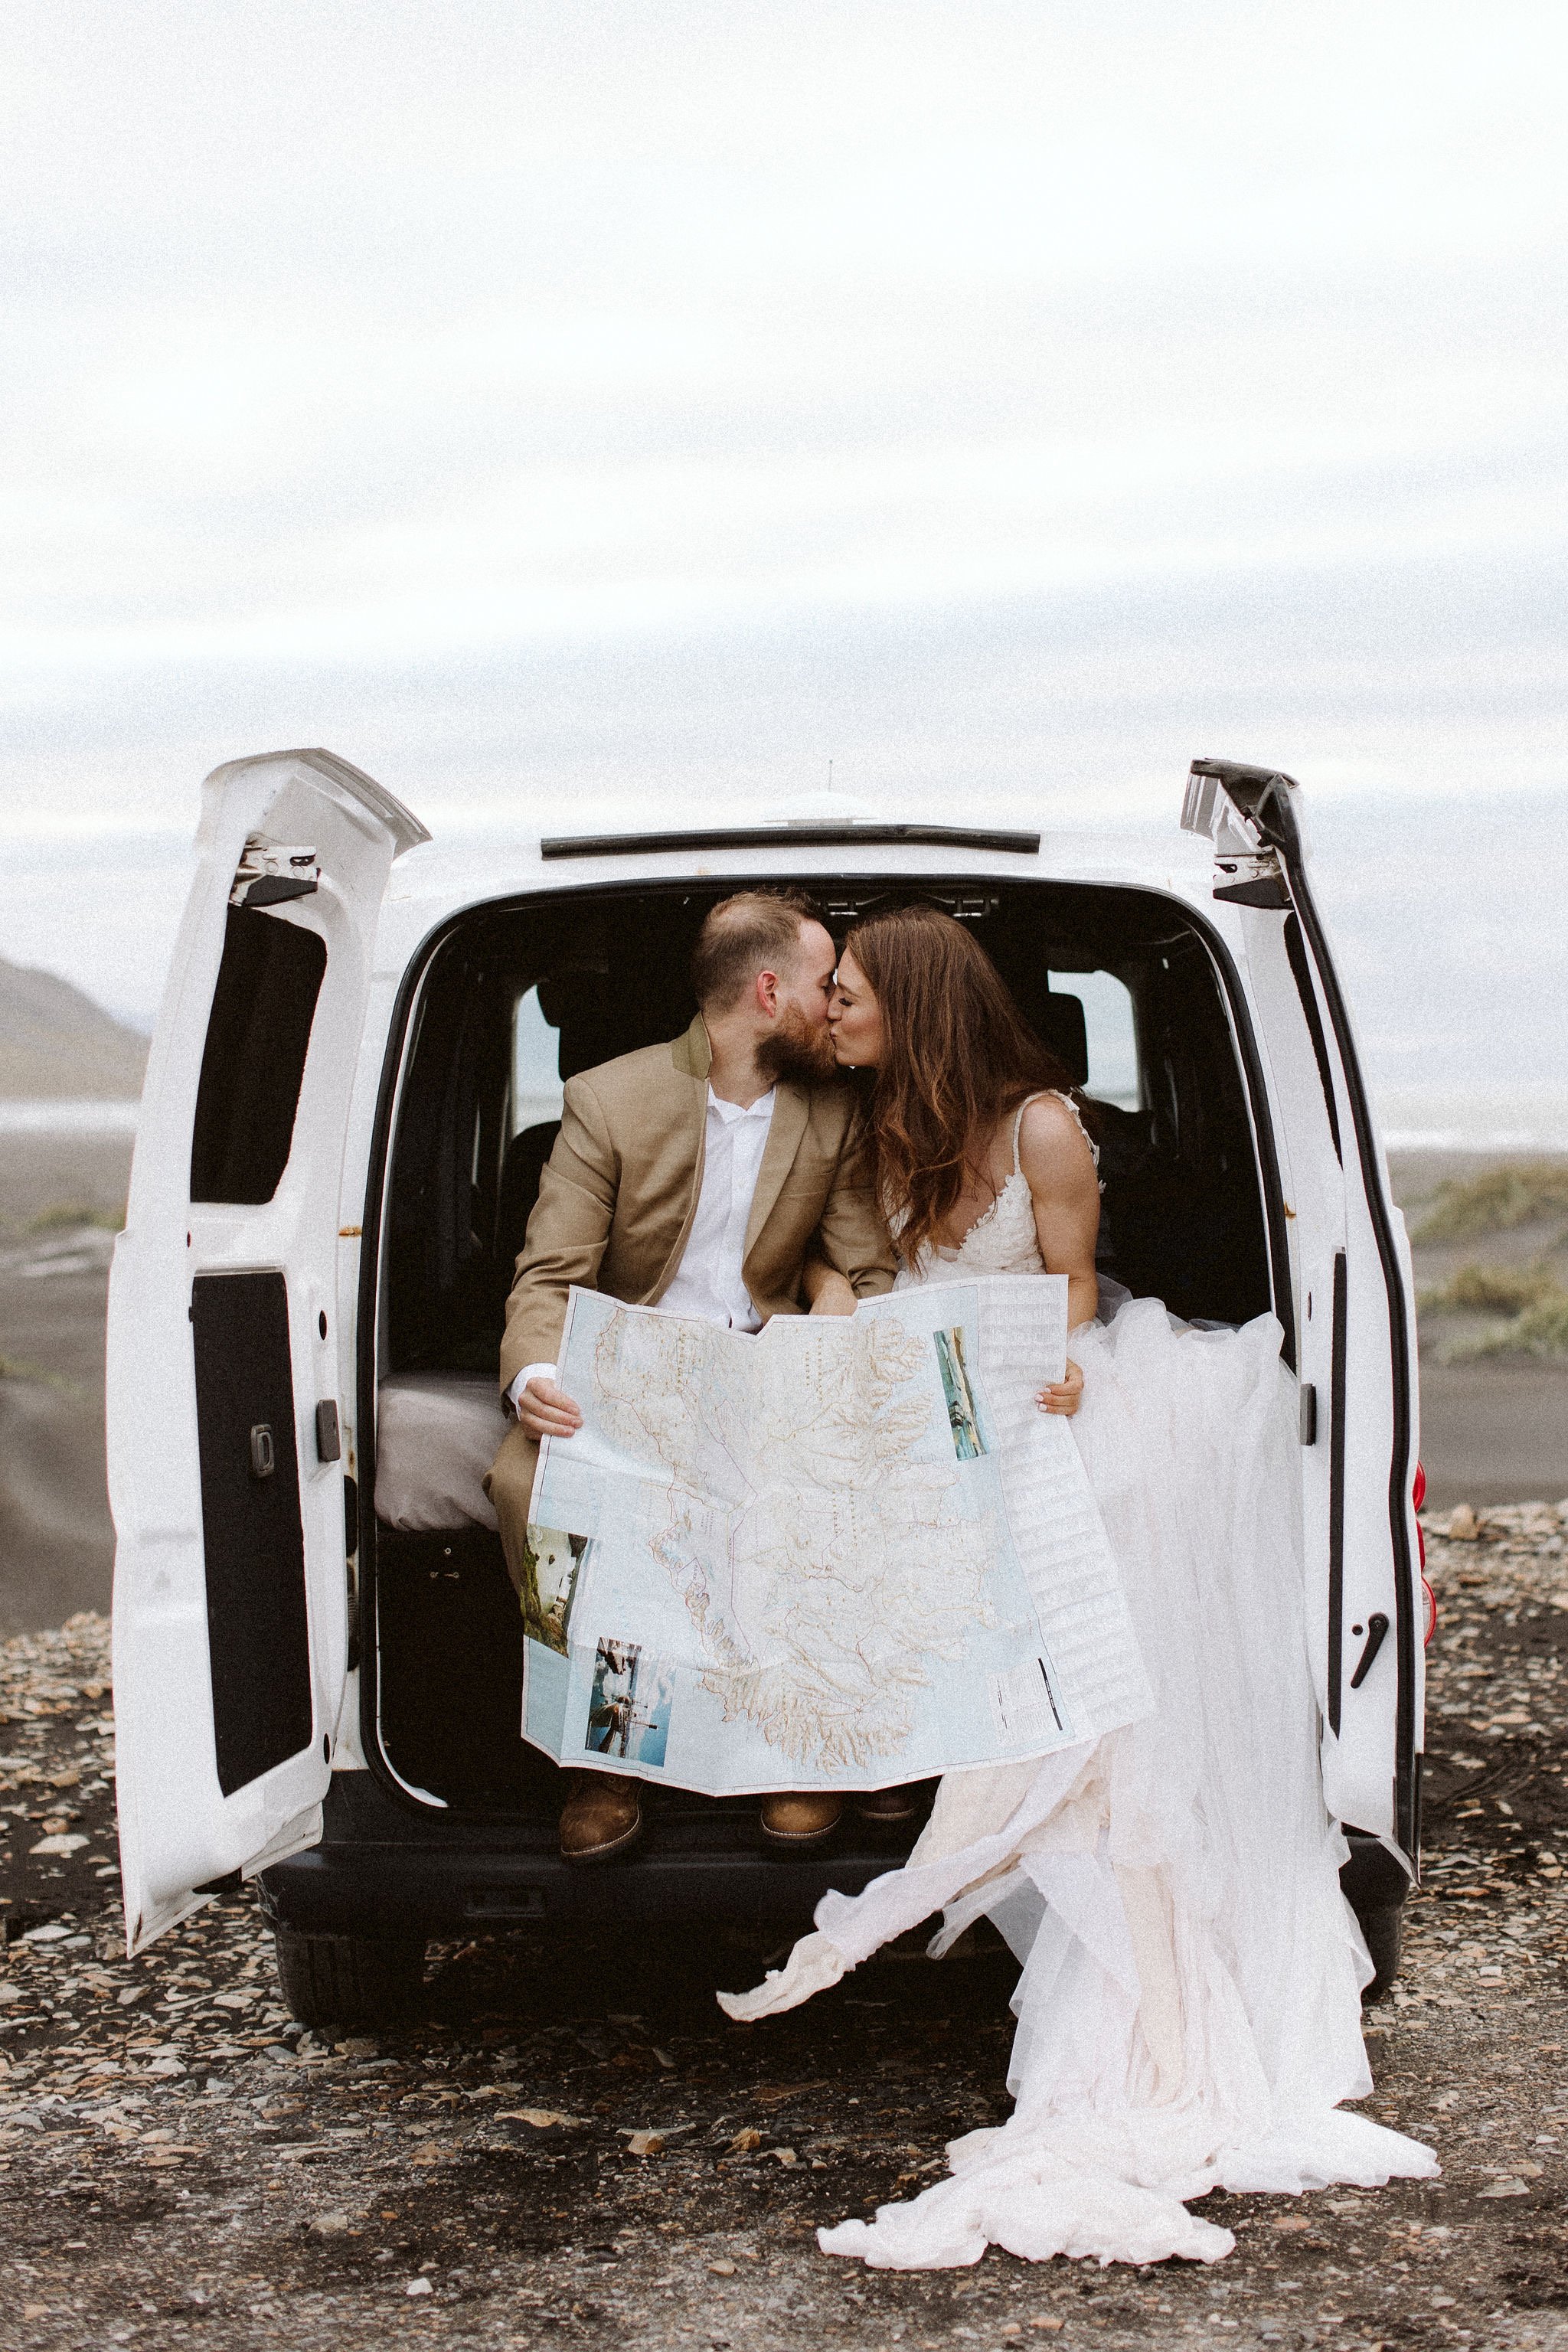  Custom wedding dress. Bride Jessica’s elopement in Iceland. Photo by  Evelyn Barkey Photography.   